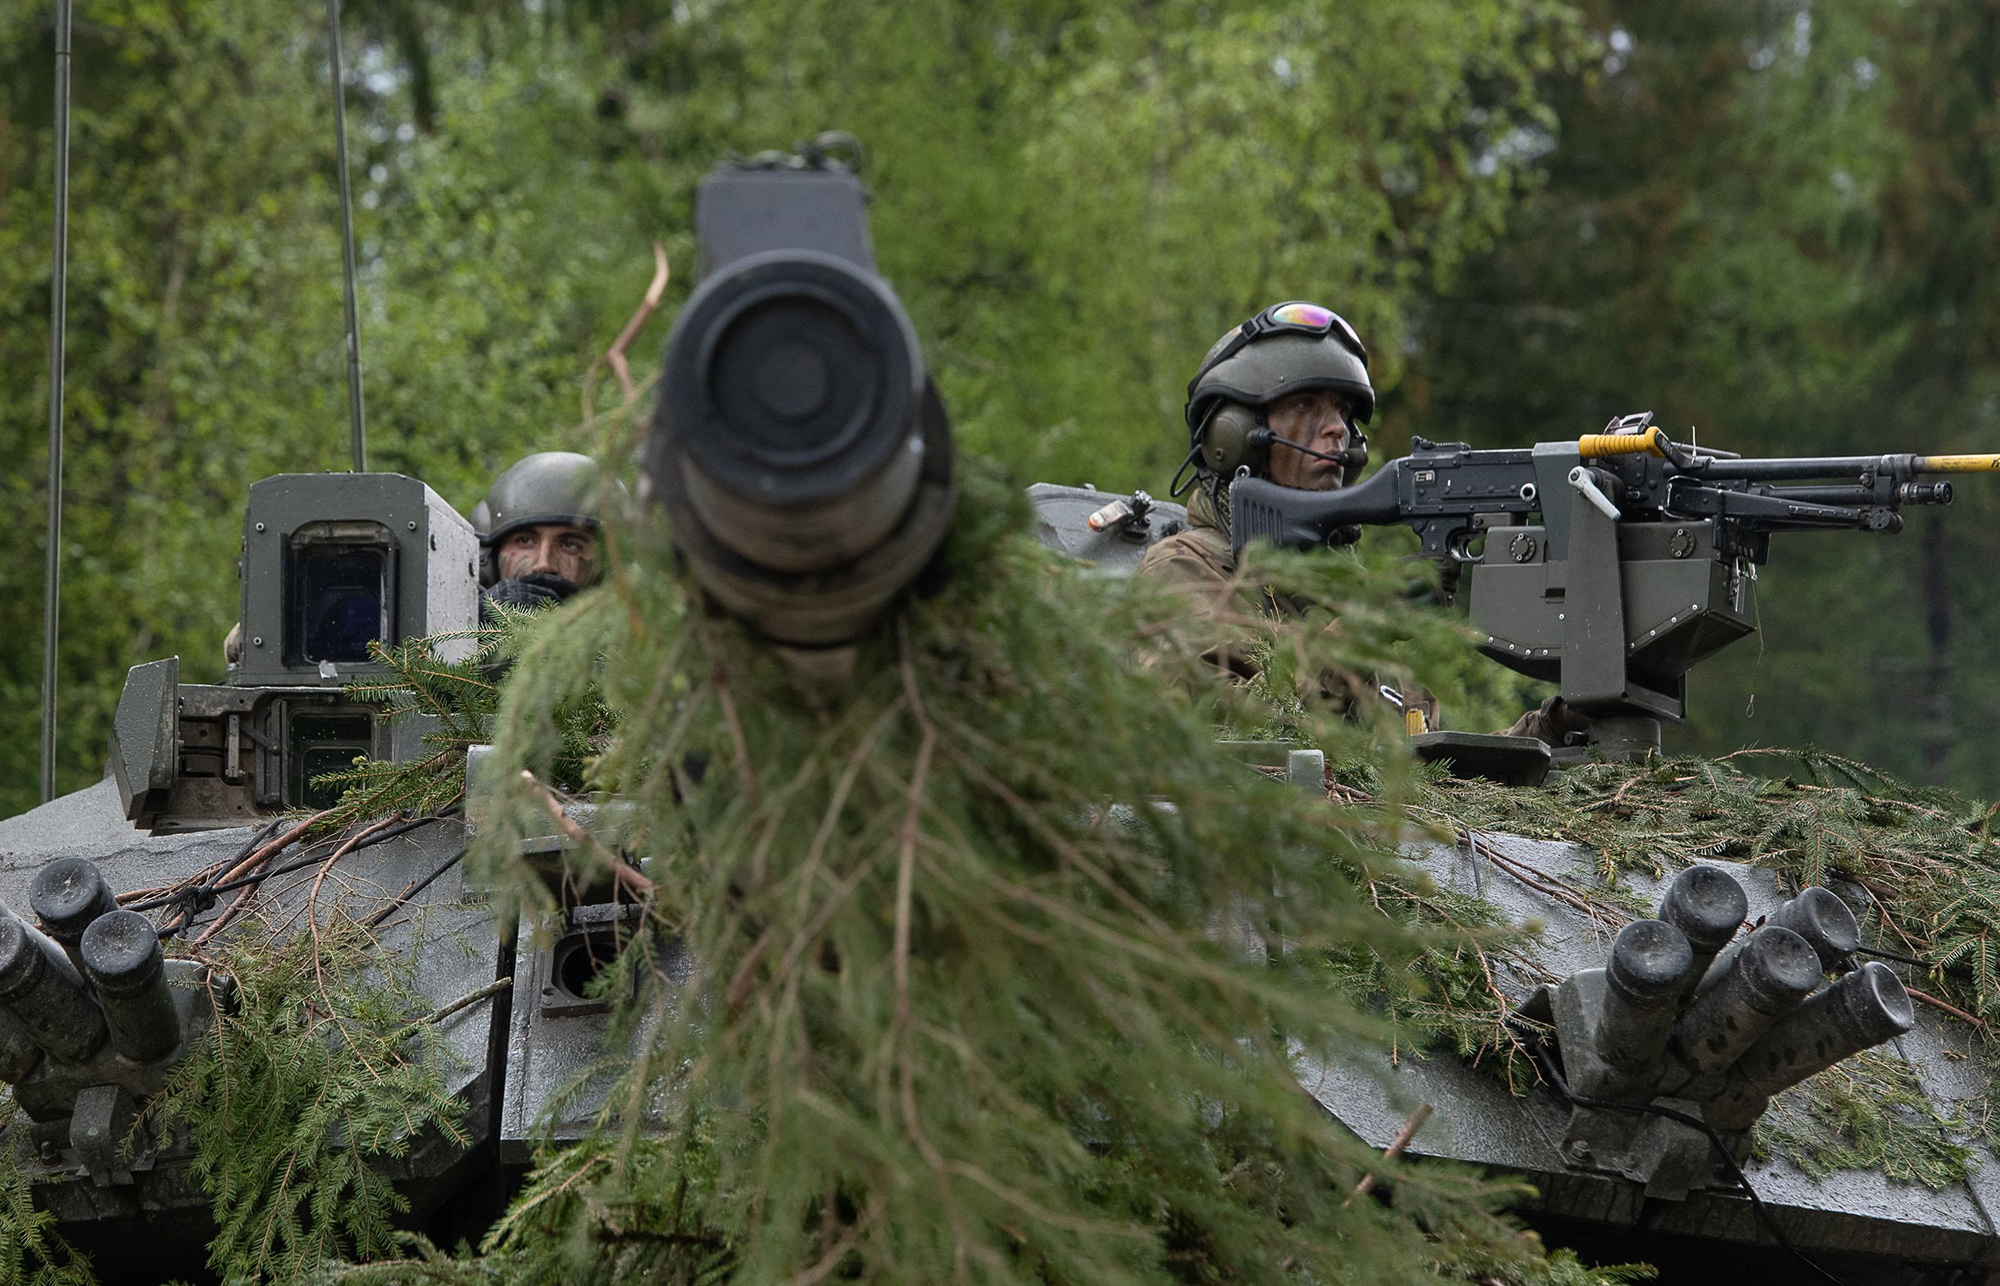 Soldiers take part in a large-scale exercise led by Estonia, with the participation of NATO troops and the Estonian Defence Forces (EDF)&nbsp;in Tapa, Estonia in May 2021.&nbsp;